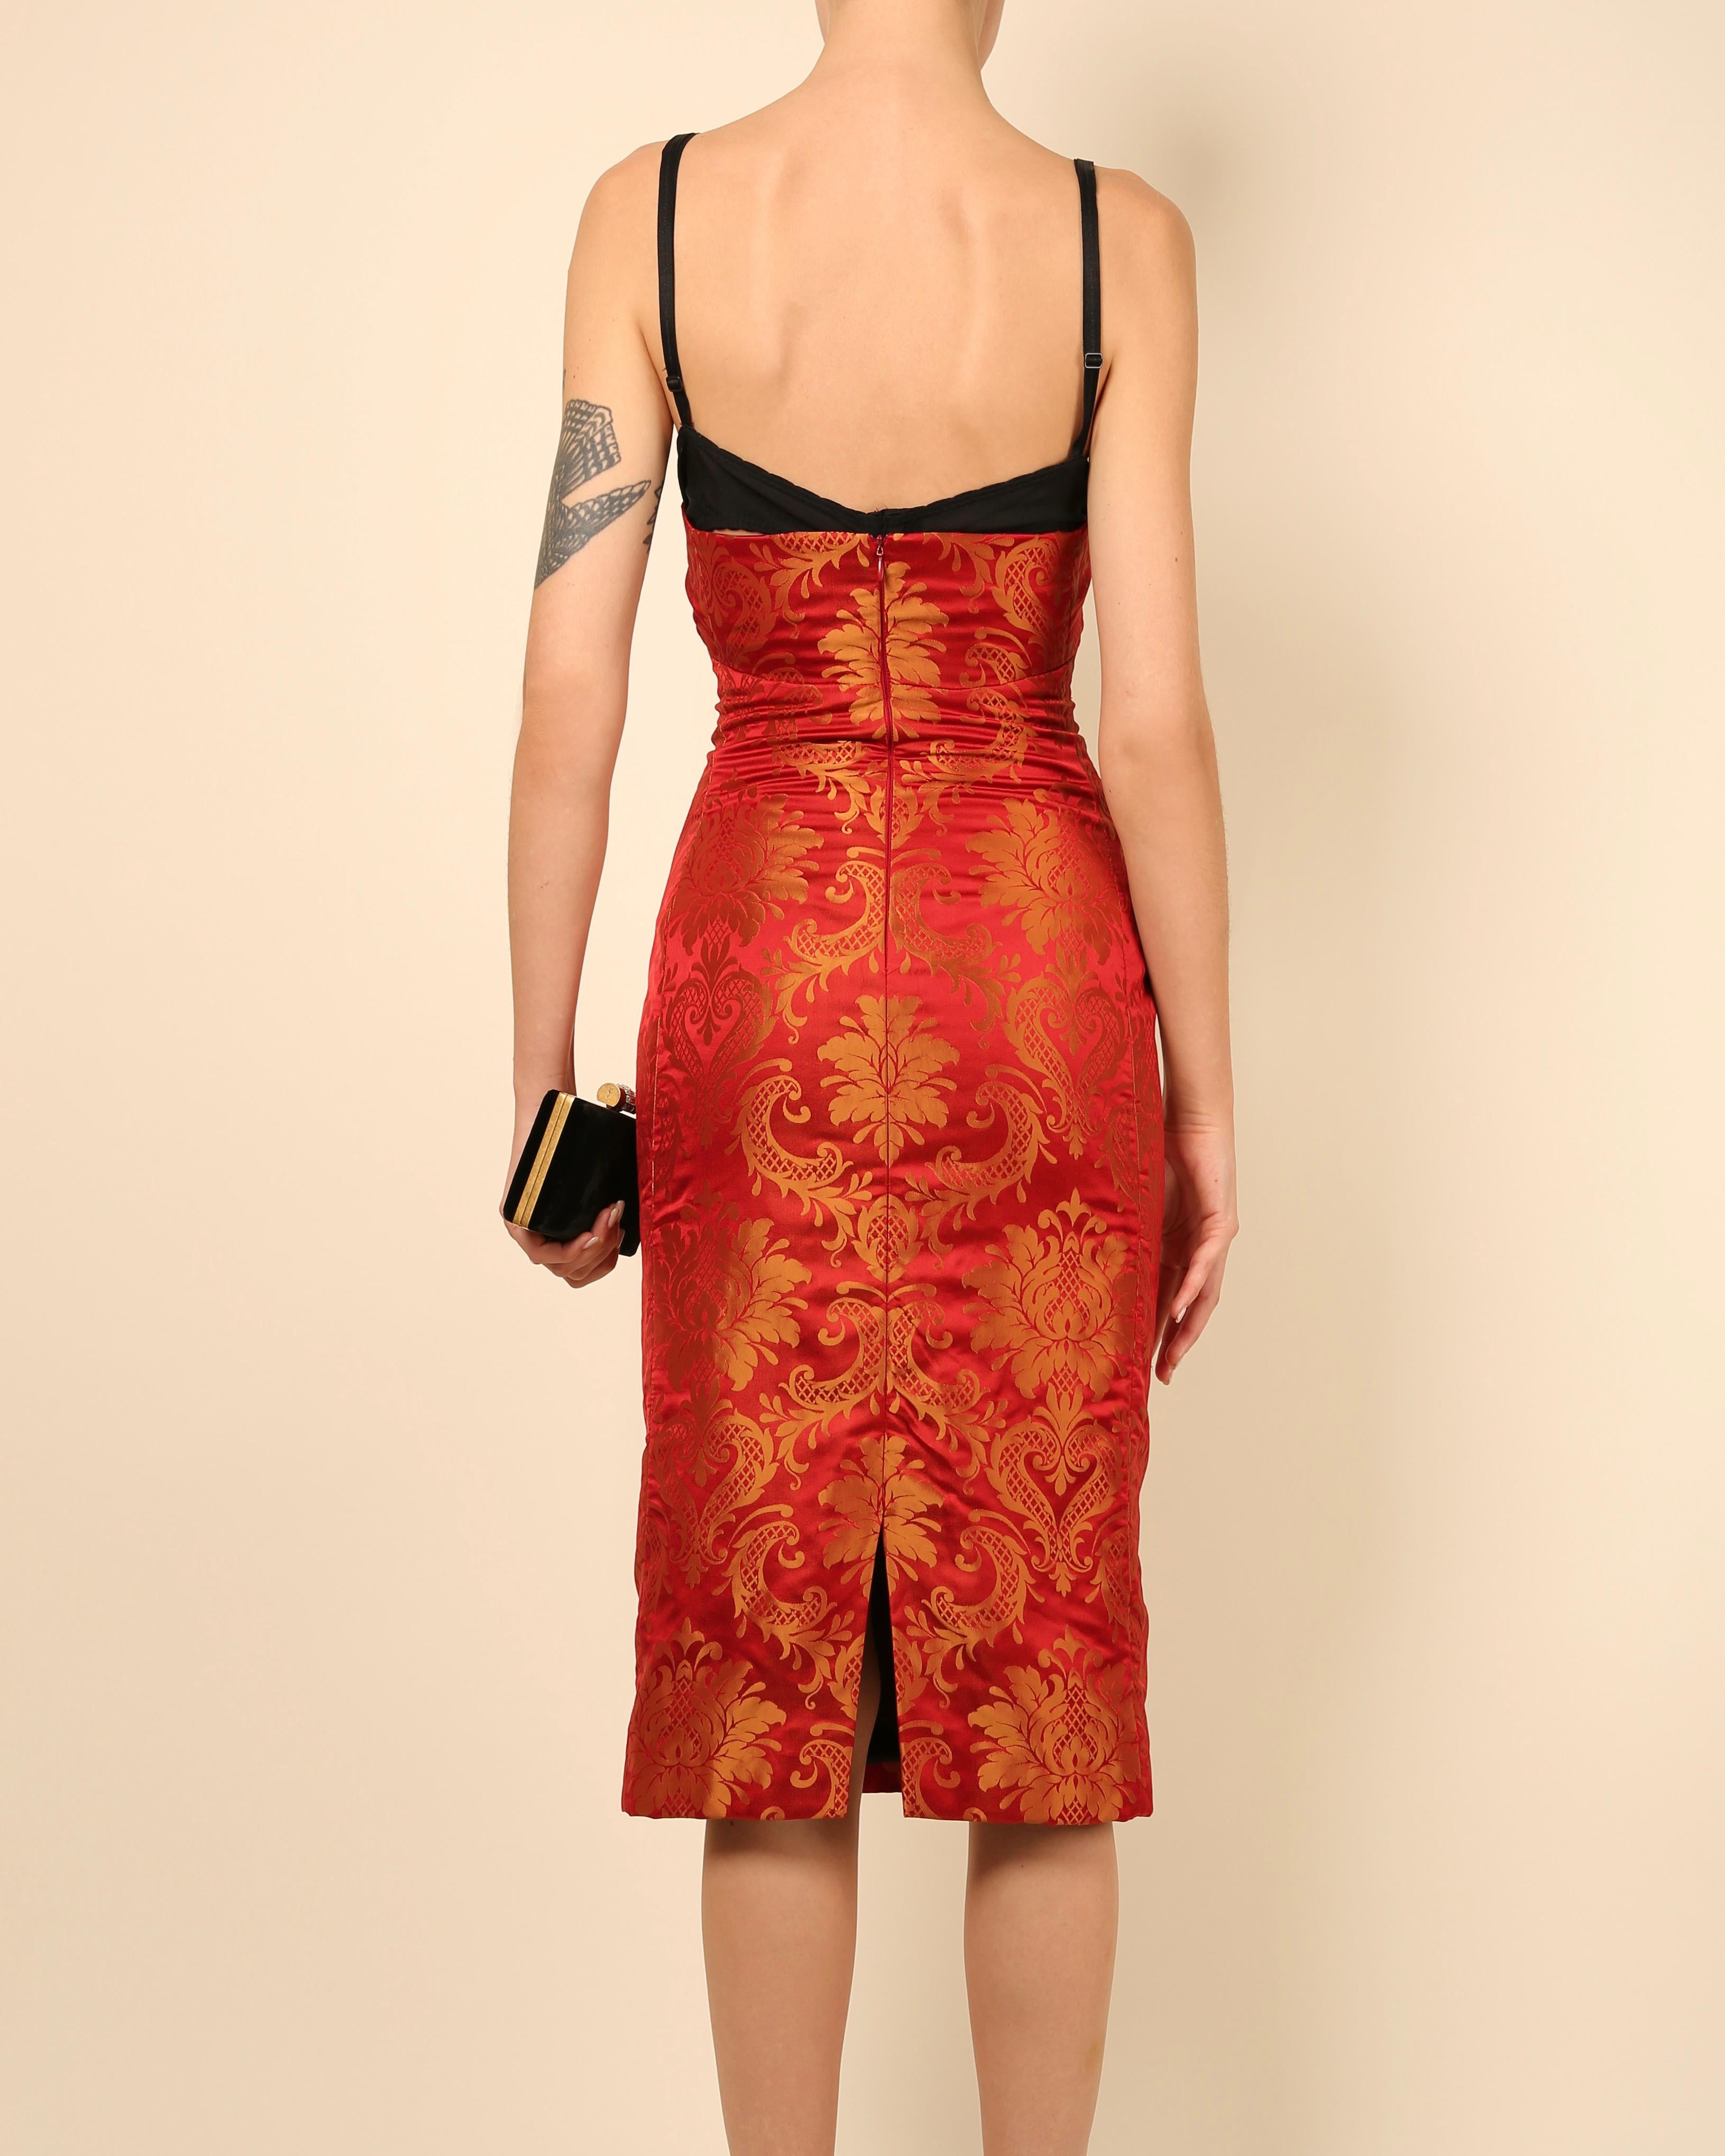 Dolce & Gabbana red gold floral print oriental asian style bustier midi dress For Sale 6